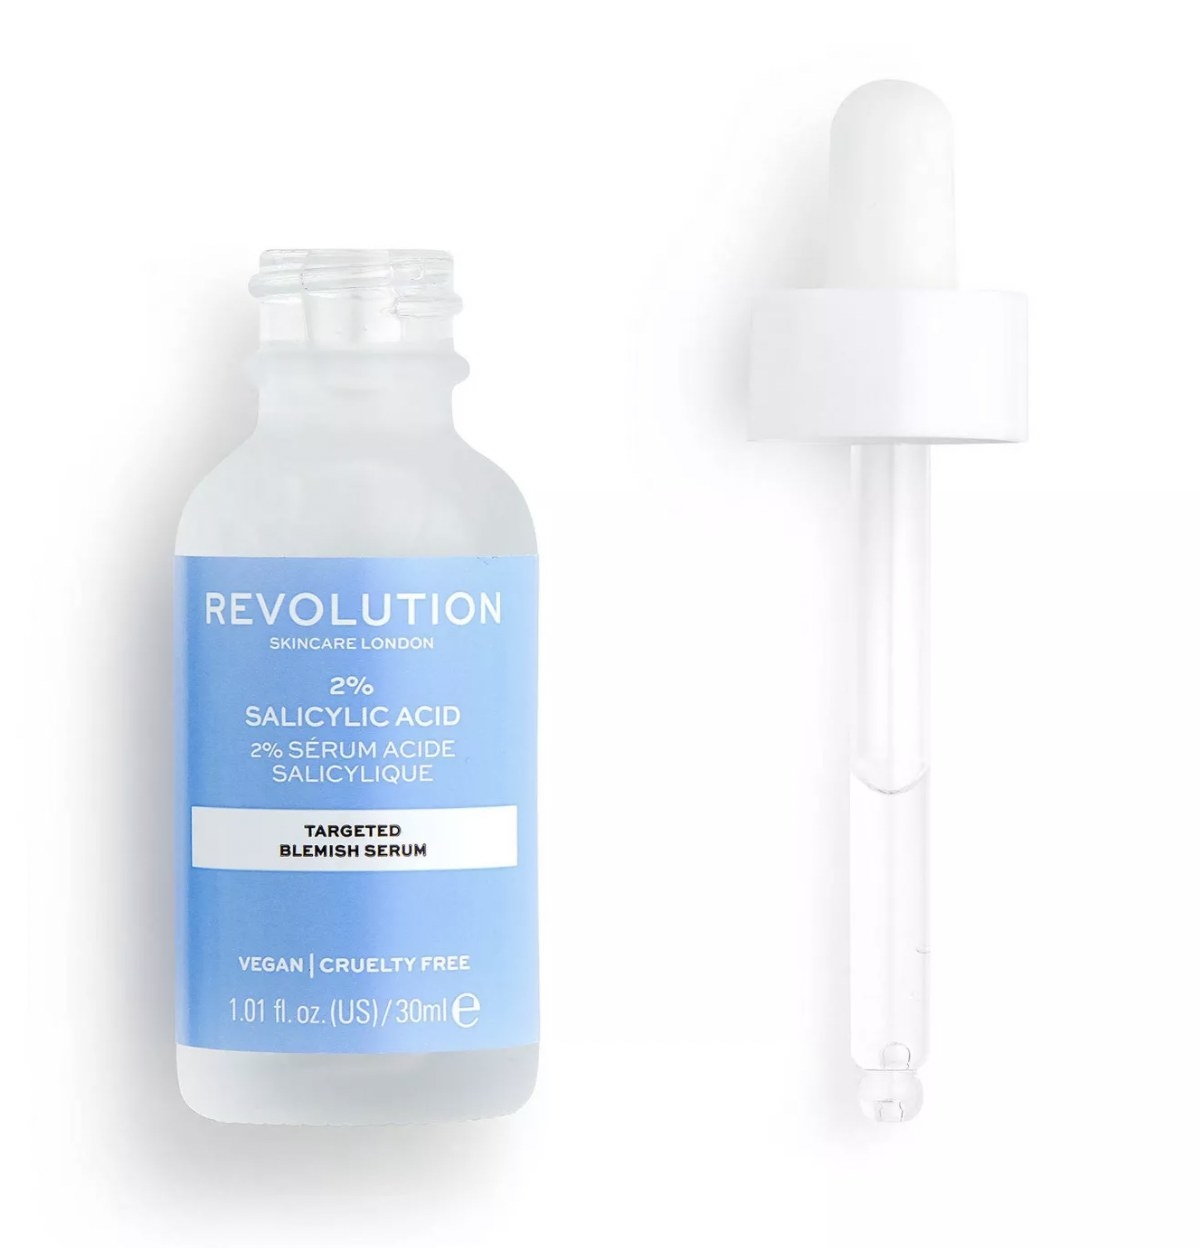 Product shot of bottle of blemish serum with blue label and clear dropper